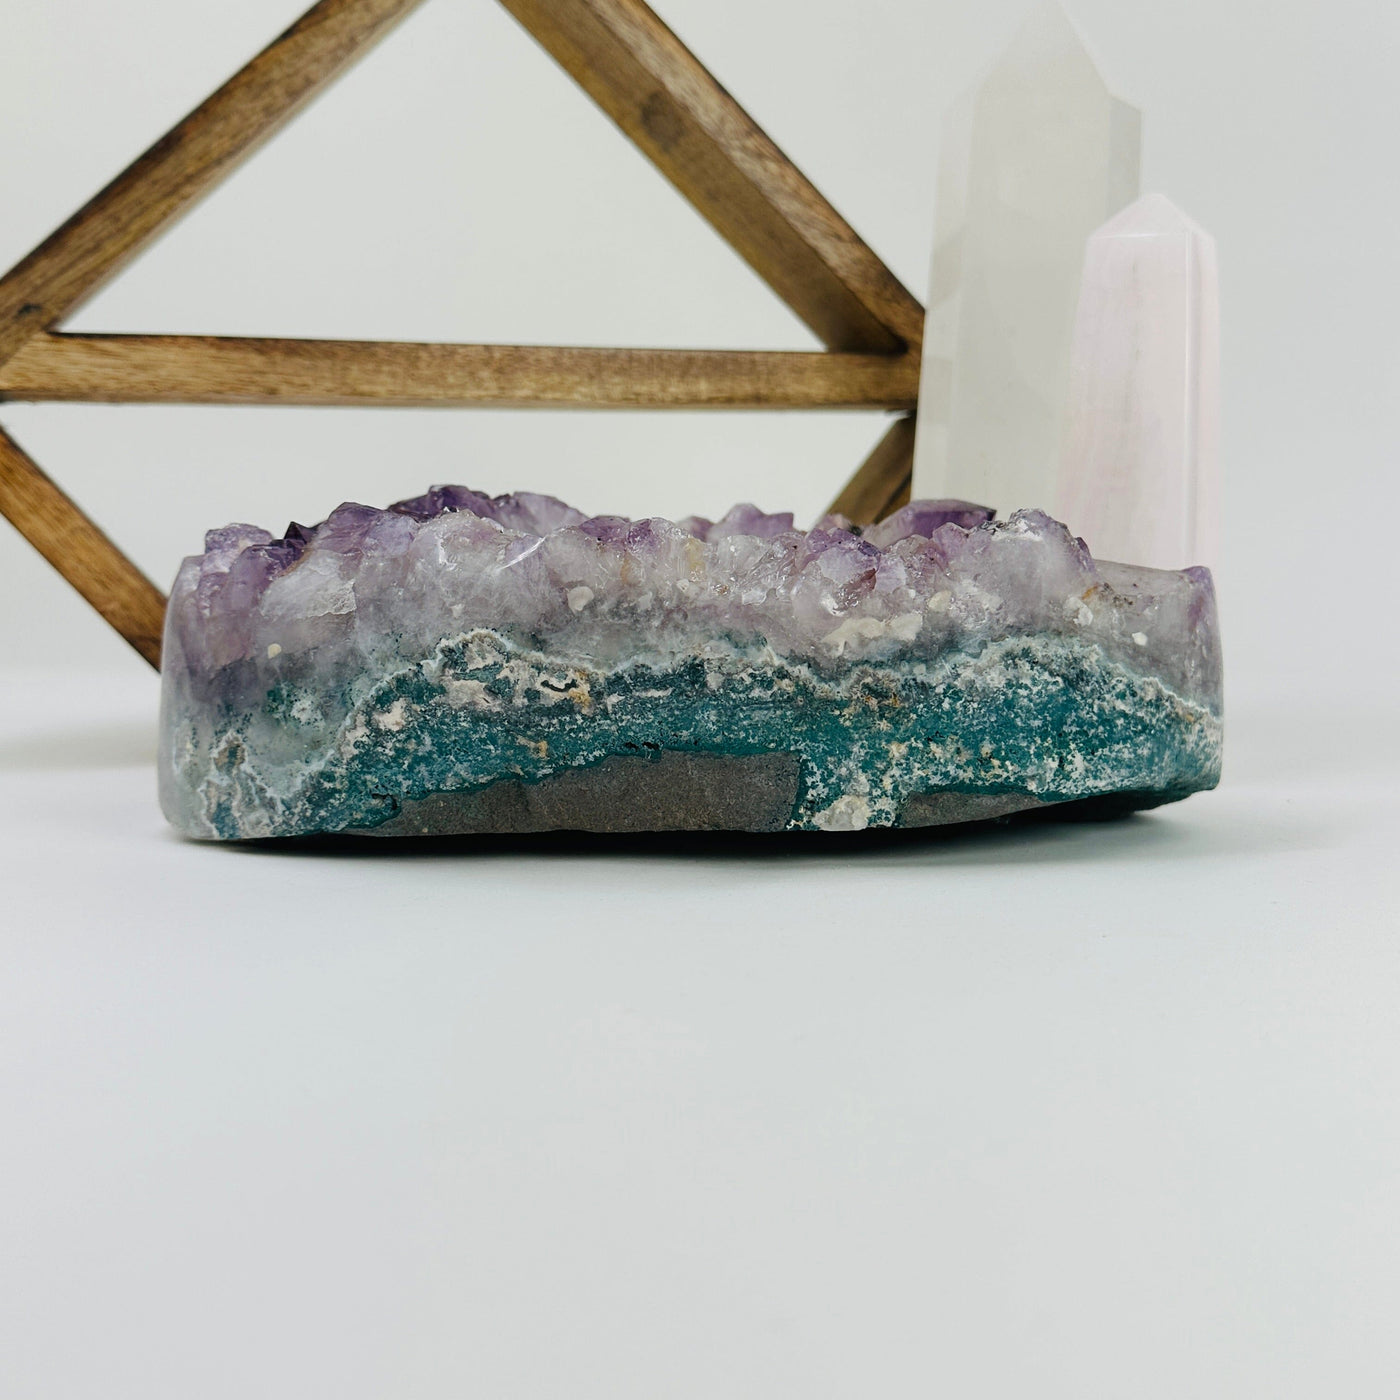 amethyst bowl with decorations in the background